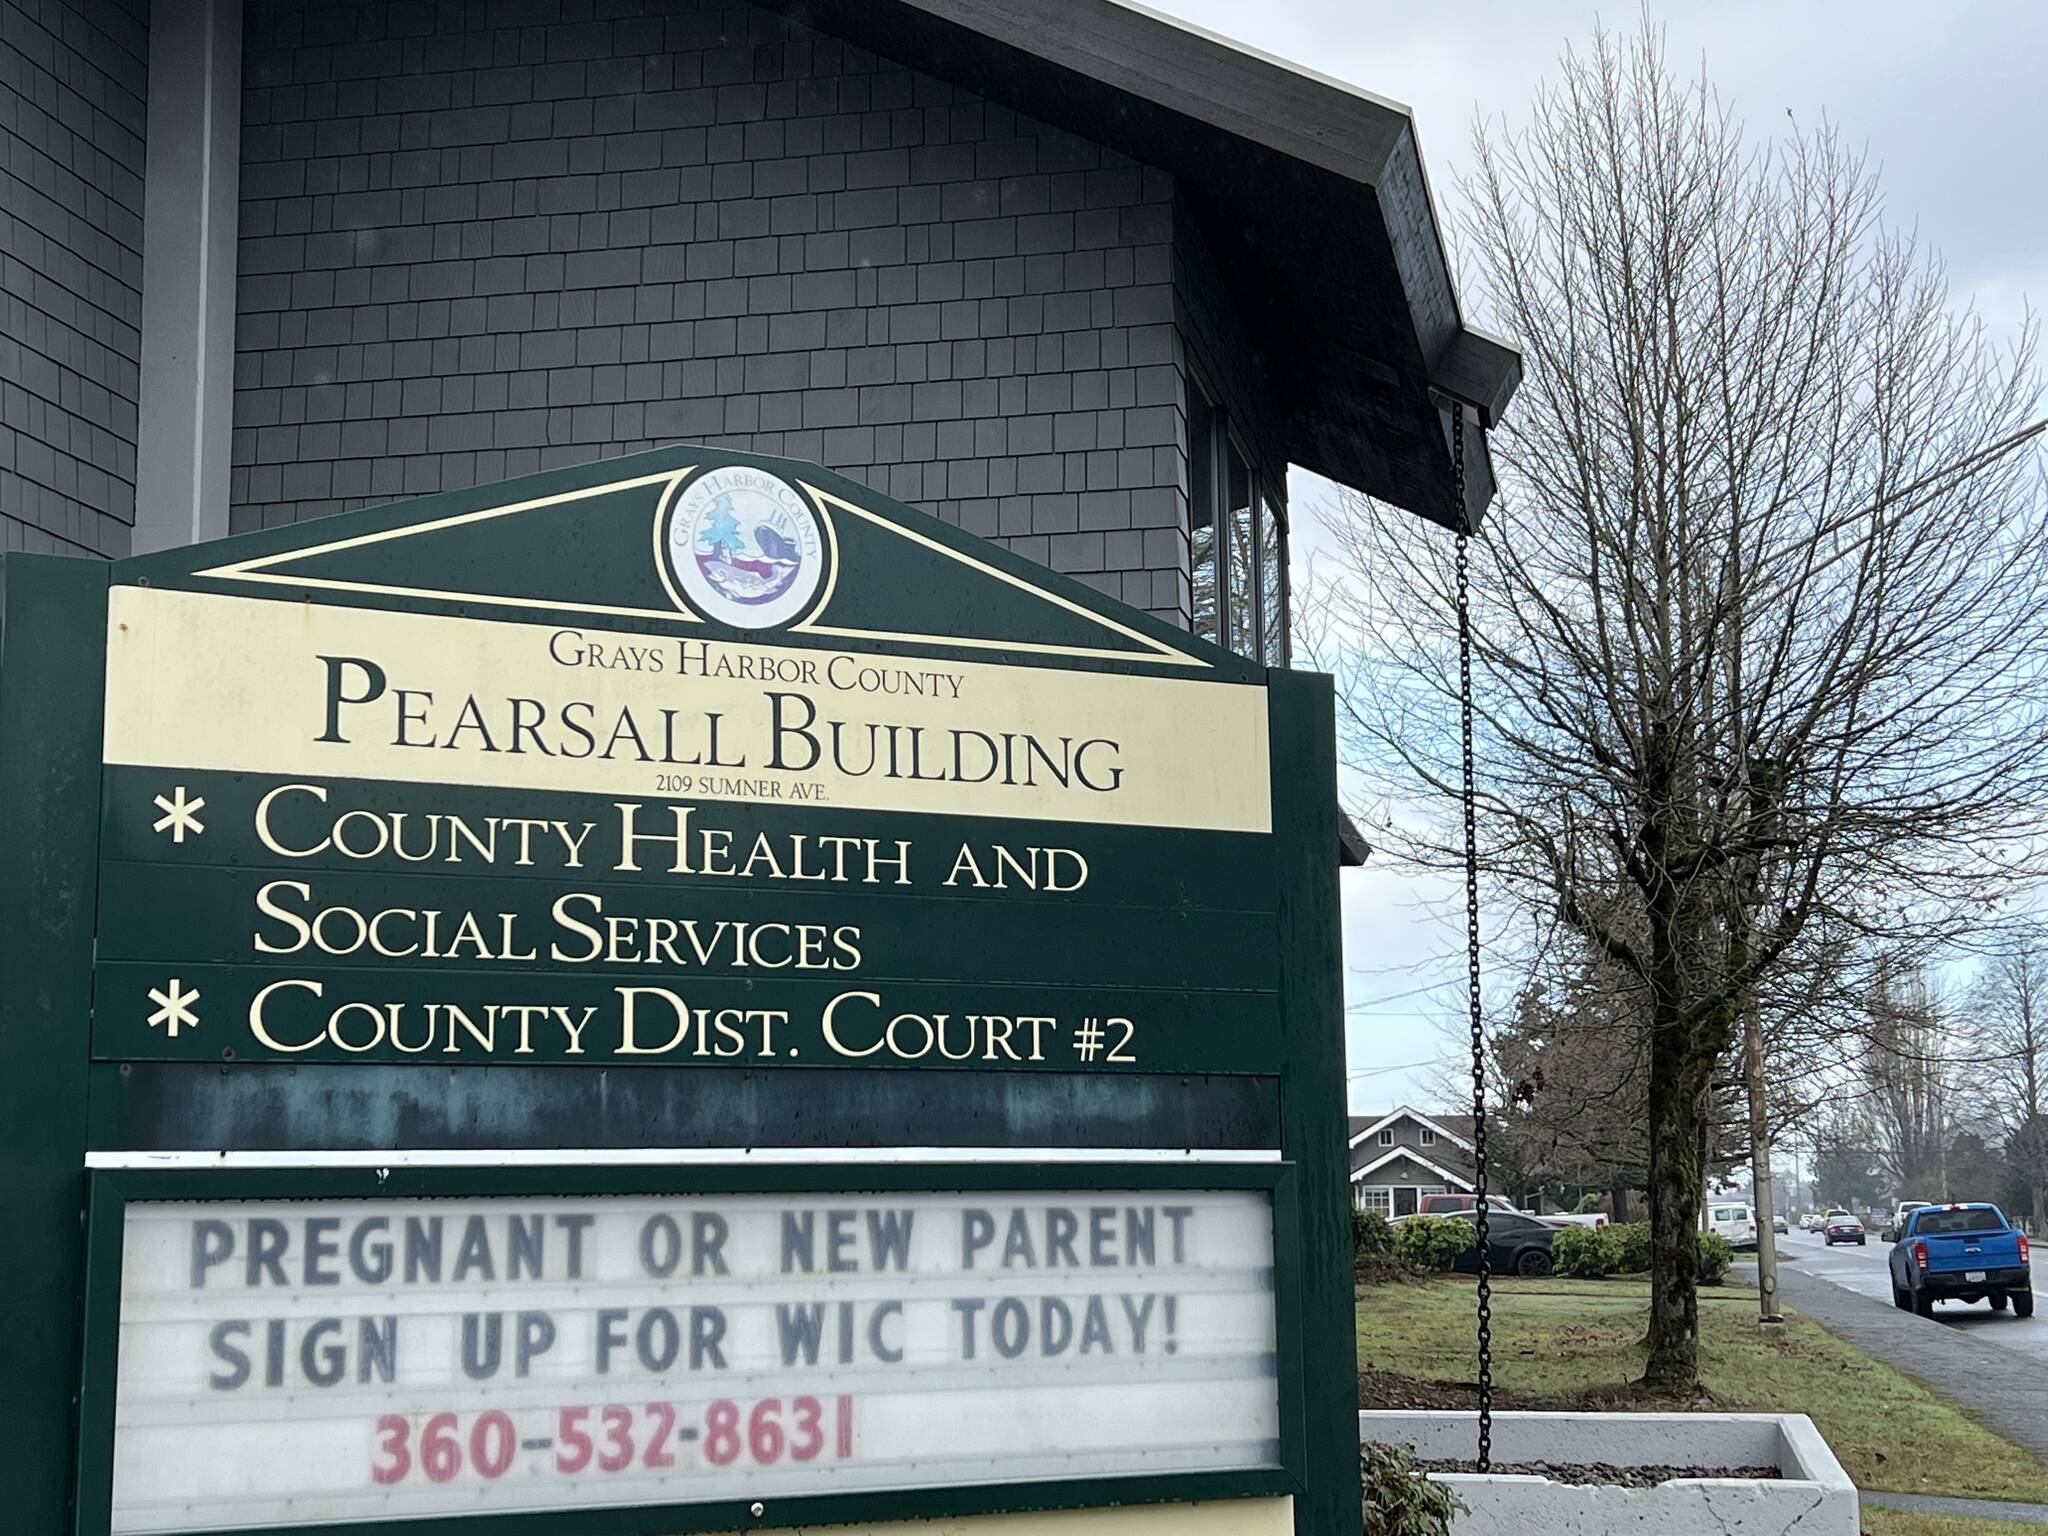 (Clayton Franke / The Daily World) Grays Harbor County Public Health will soon seek providers for a mental health center, among other initiatives, in Grays Harbor County.